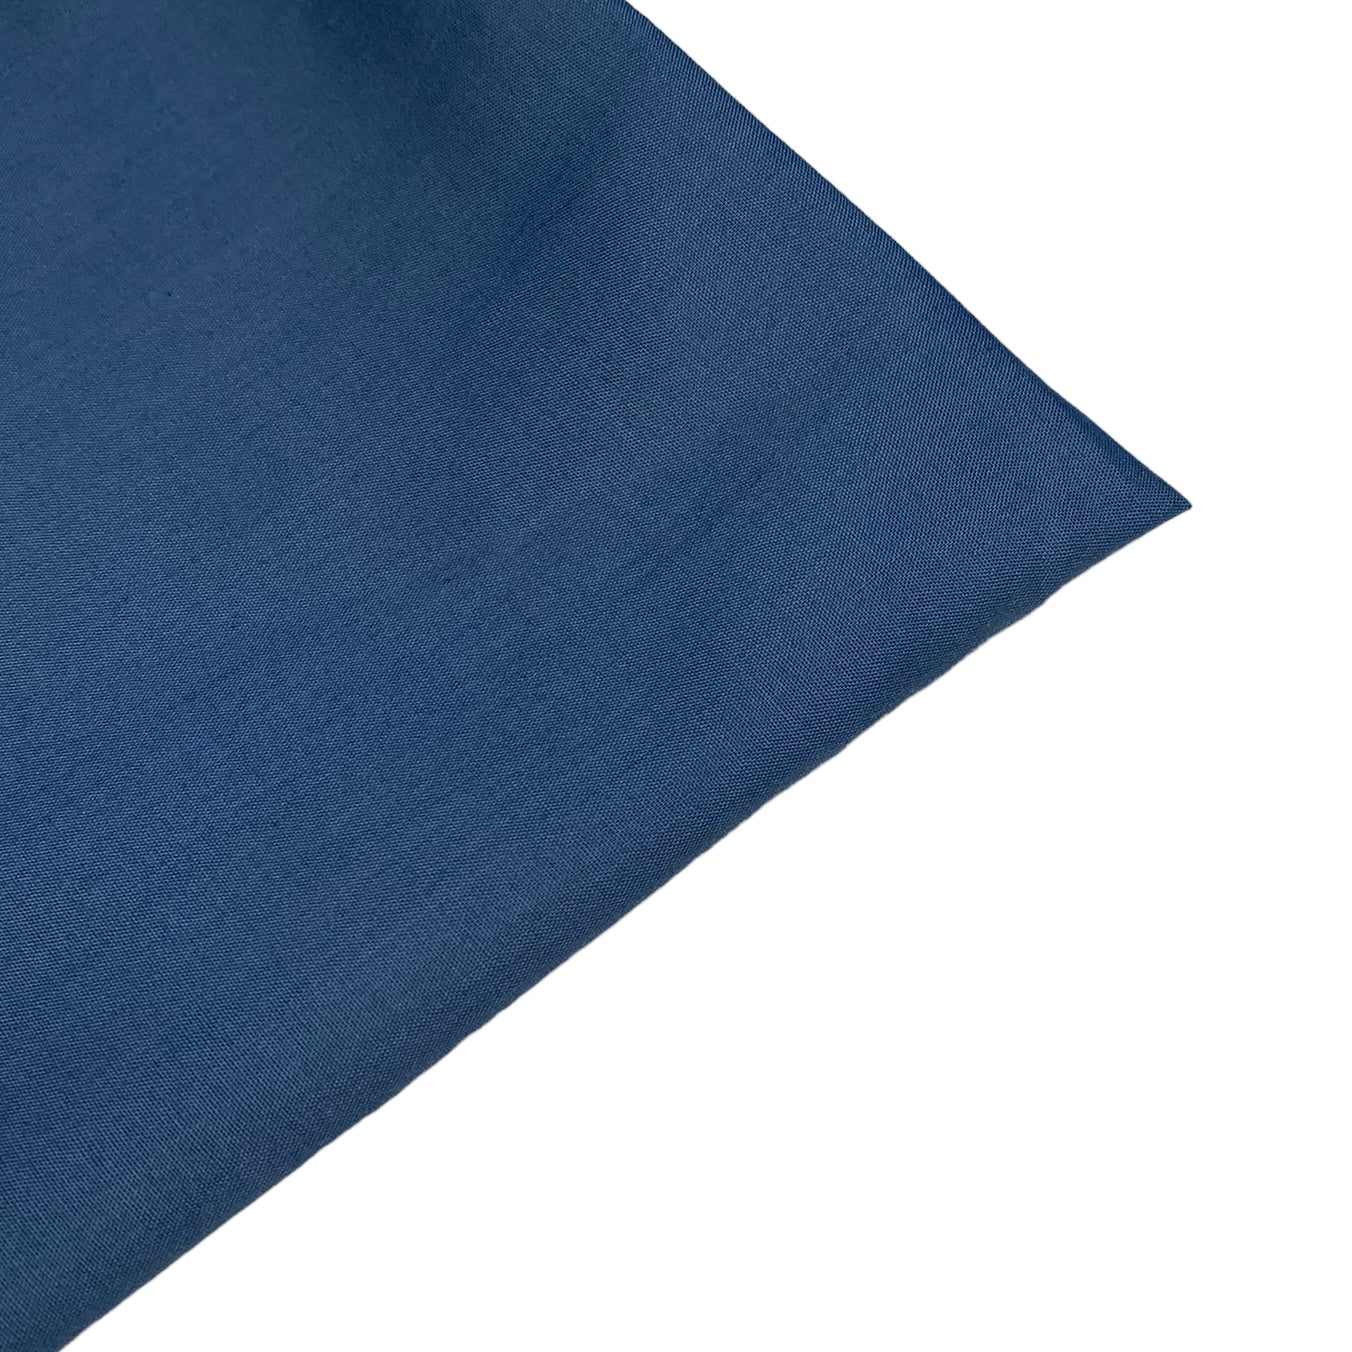 Polyester/Cotton Broadcloth - Blue Grey · King Textiles